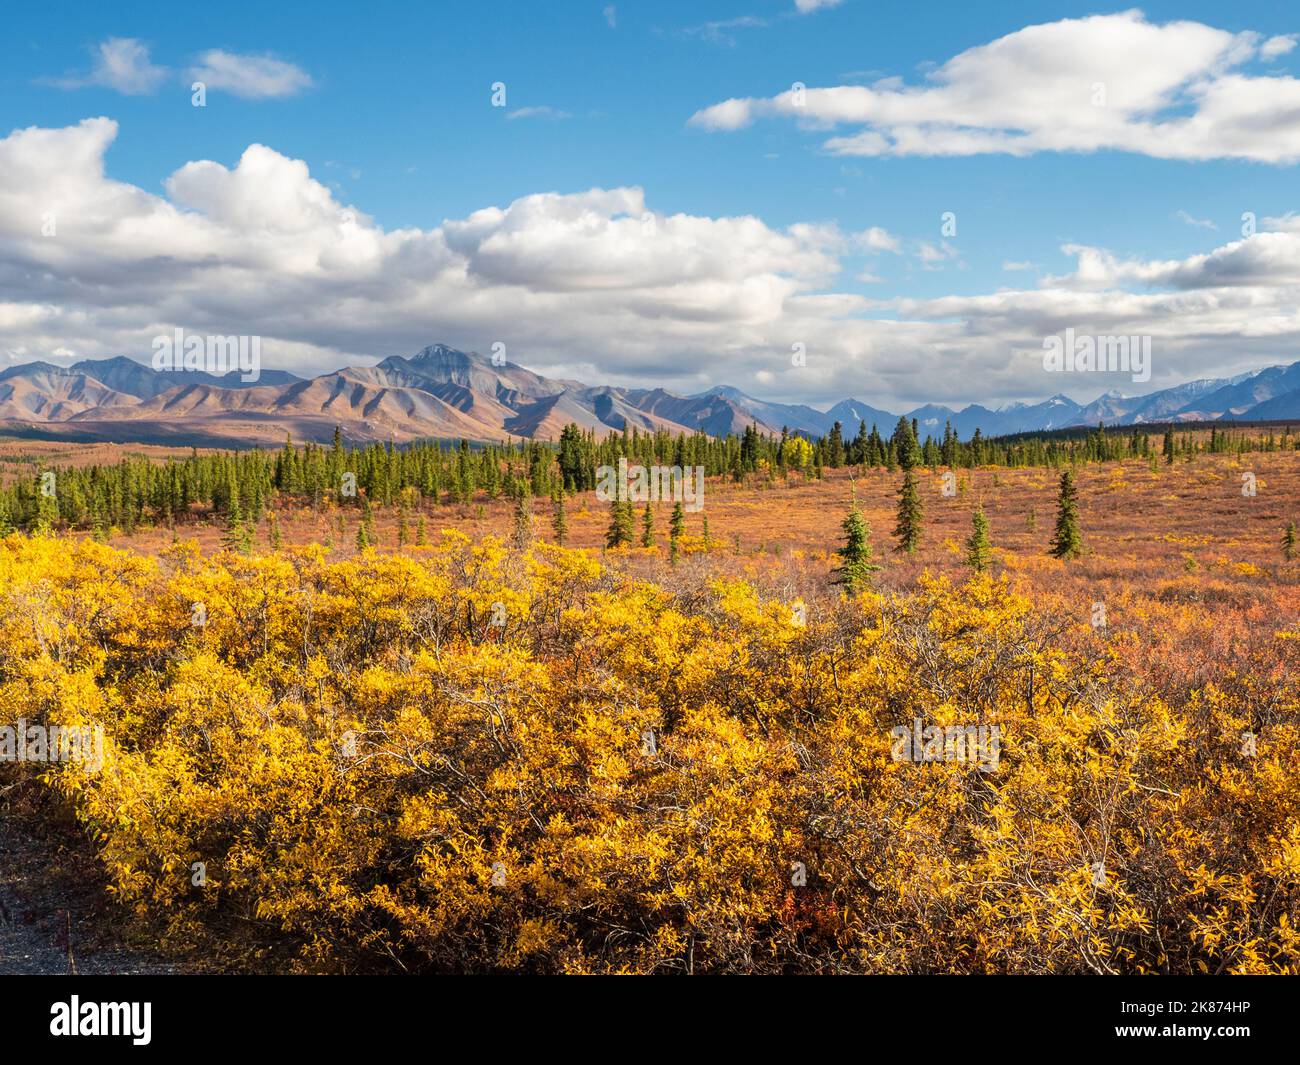 Fall color change amongst the trees and shrubs in Denali National Park, Alaska, United States of America, North America Stock Photo